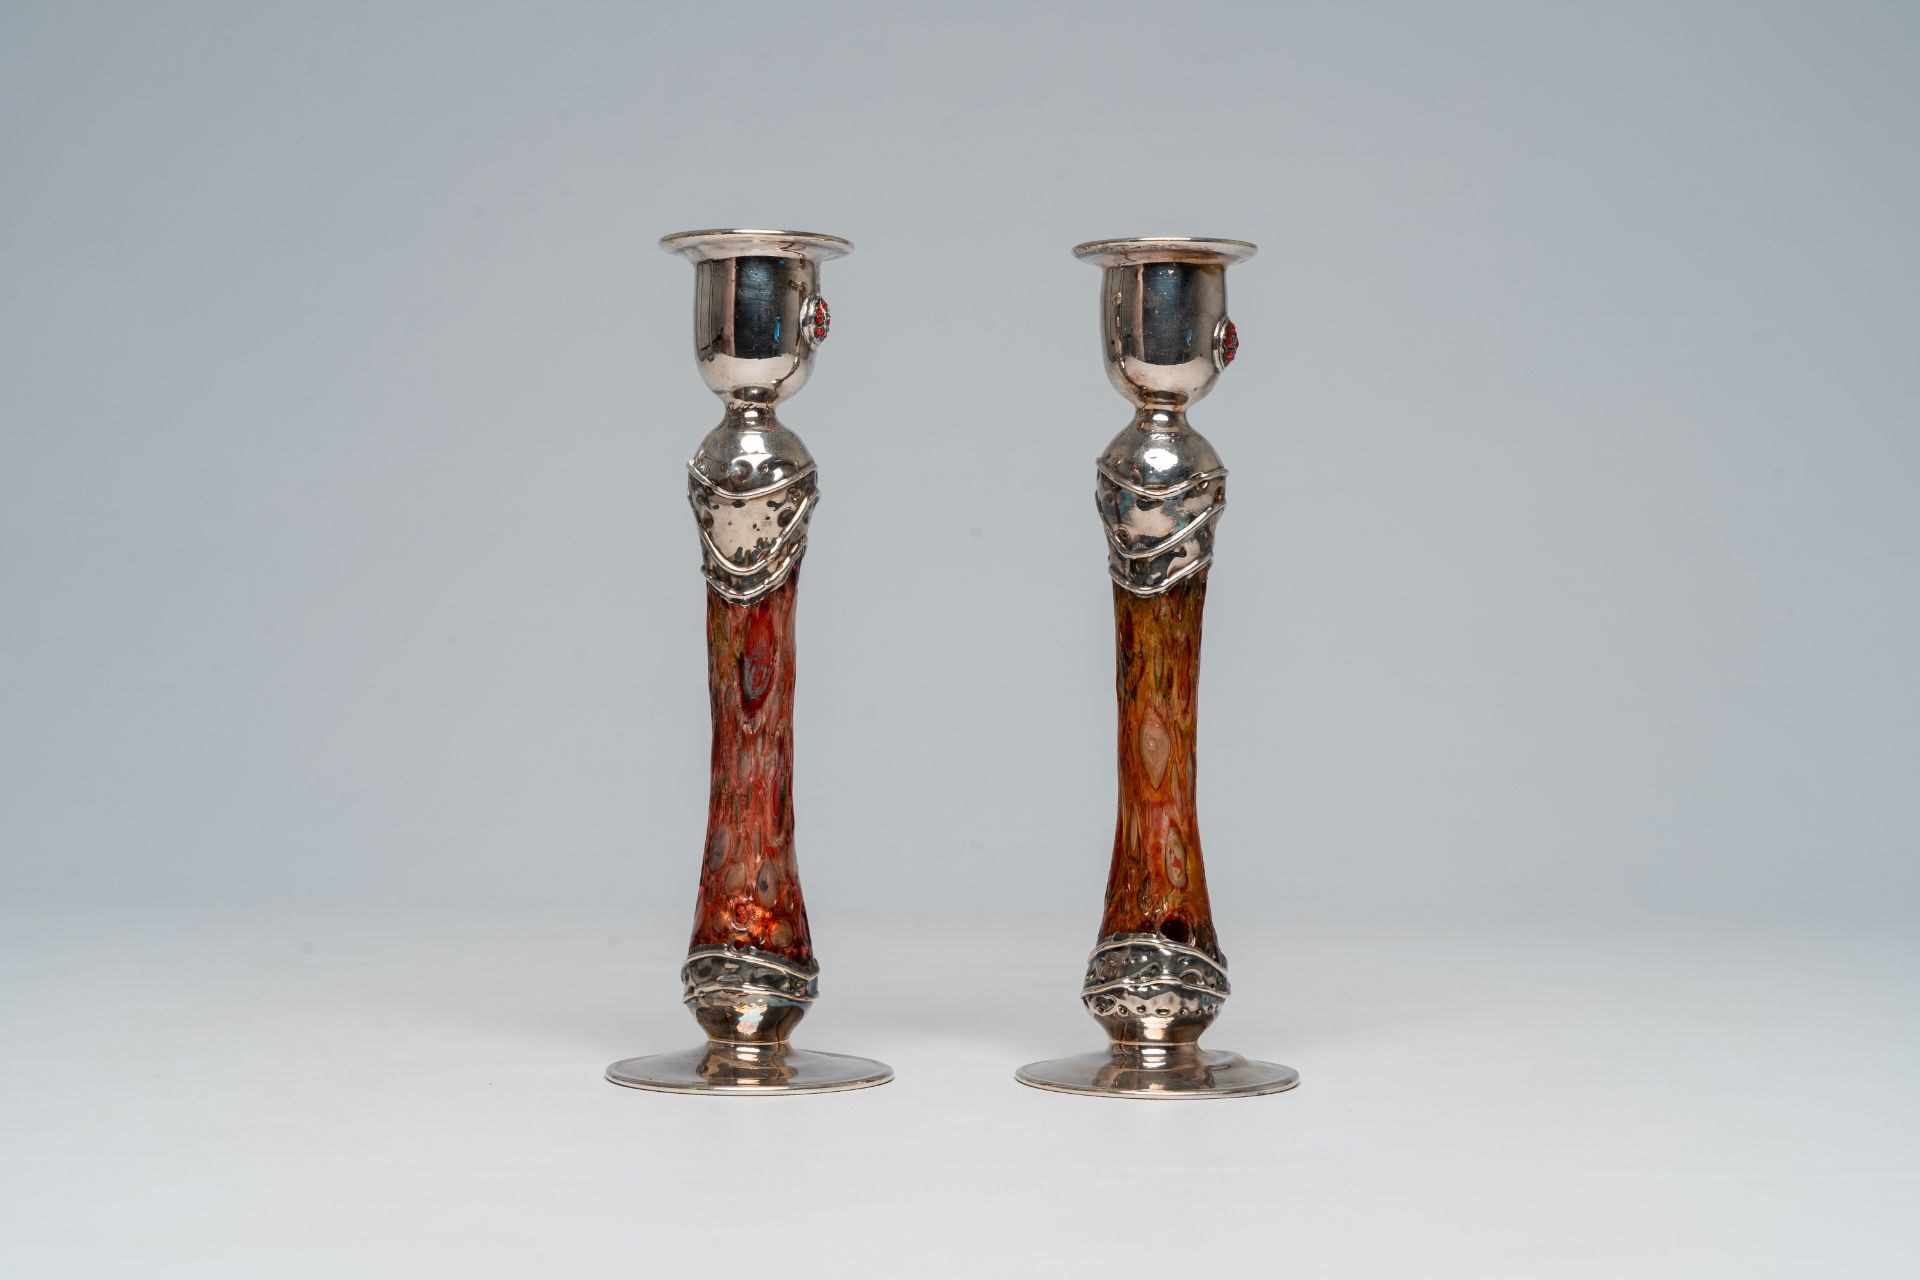 A pair of English or Scottish Arts & Crafts style silver and glass candlesticks, 20th C. - Image 5 of 11